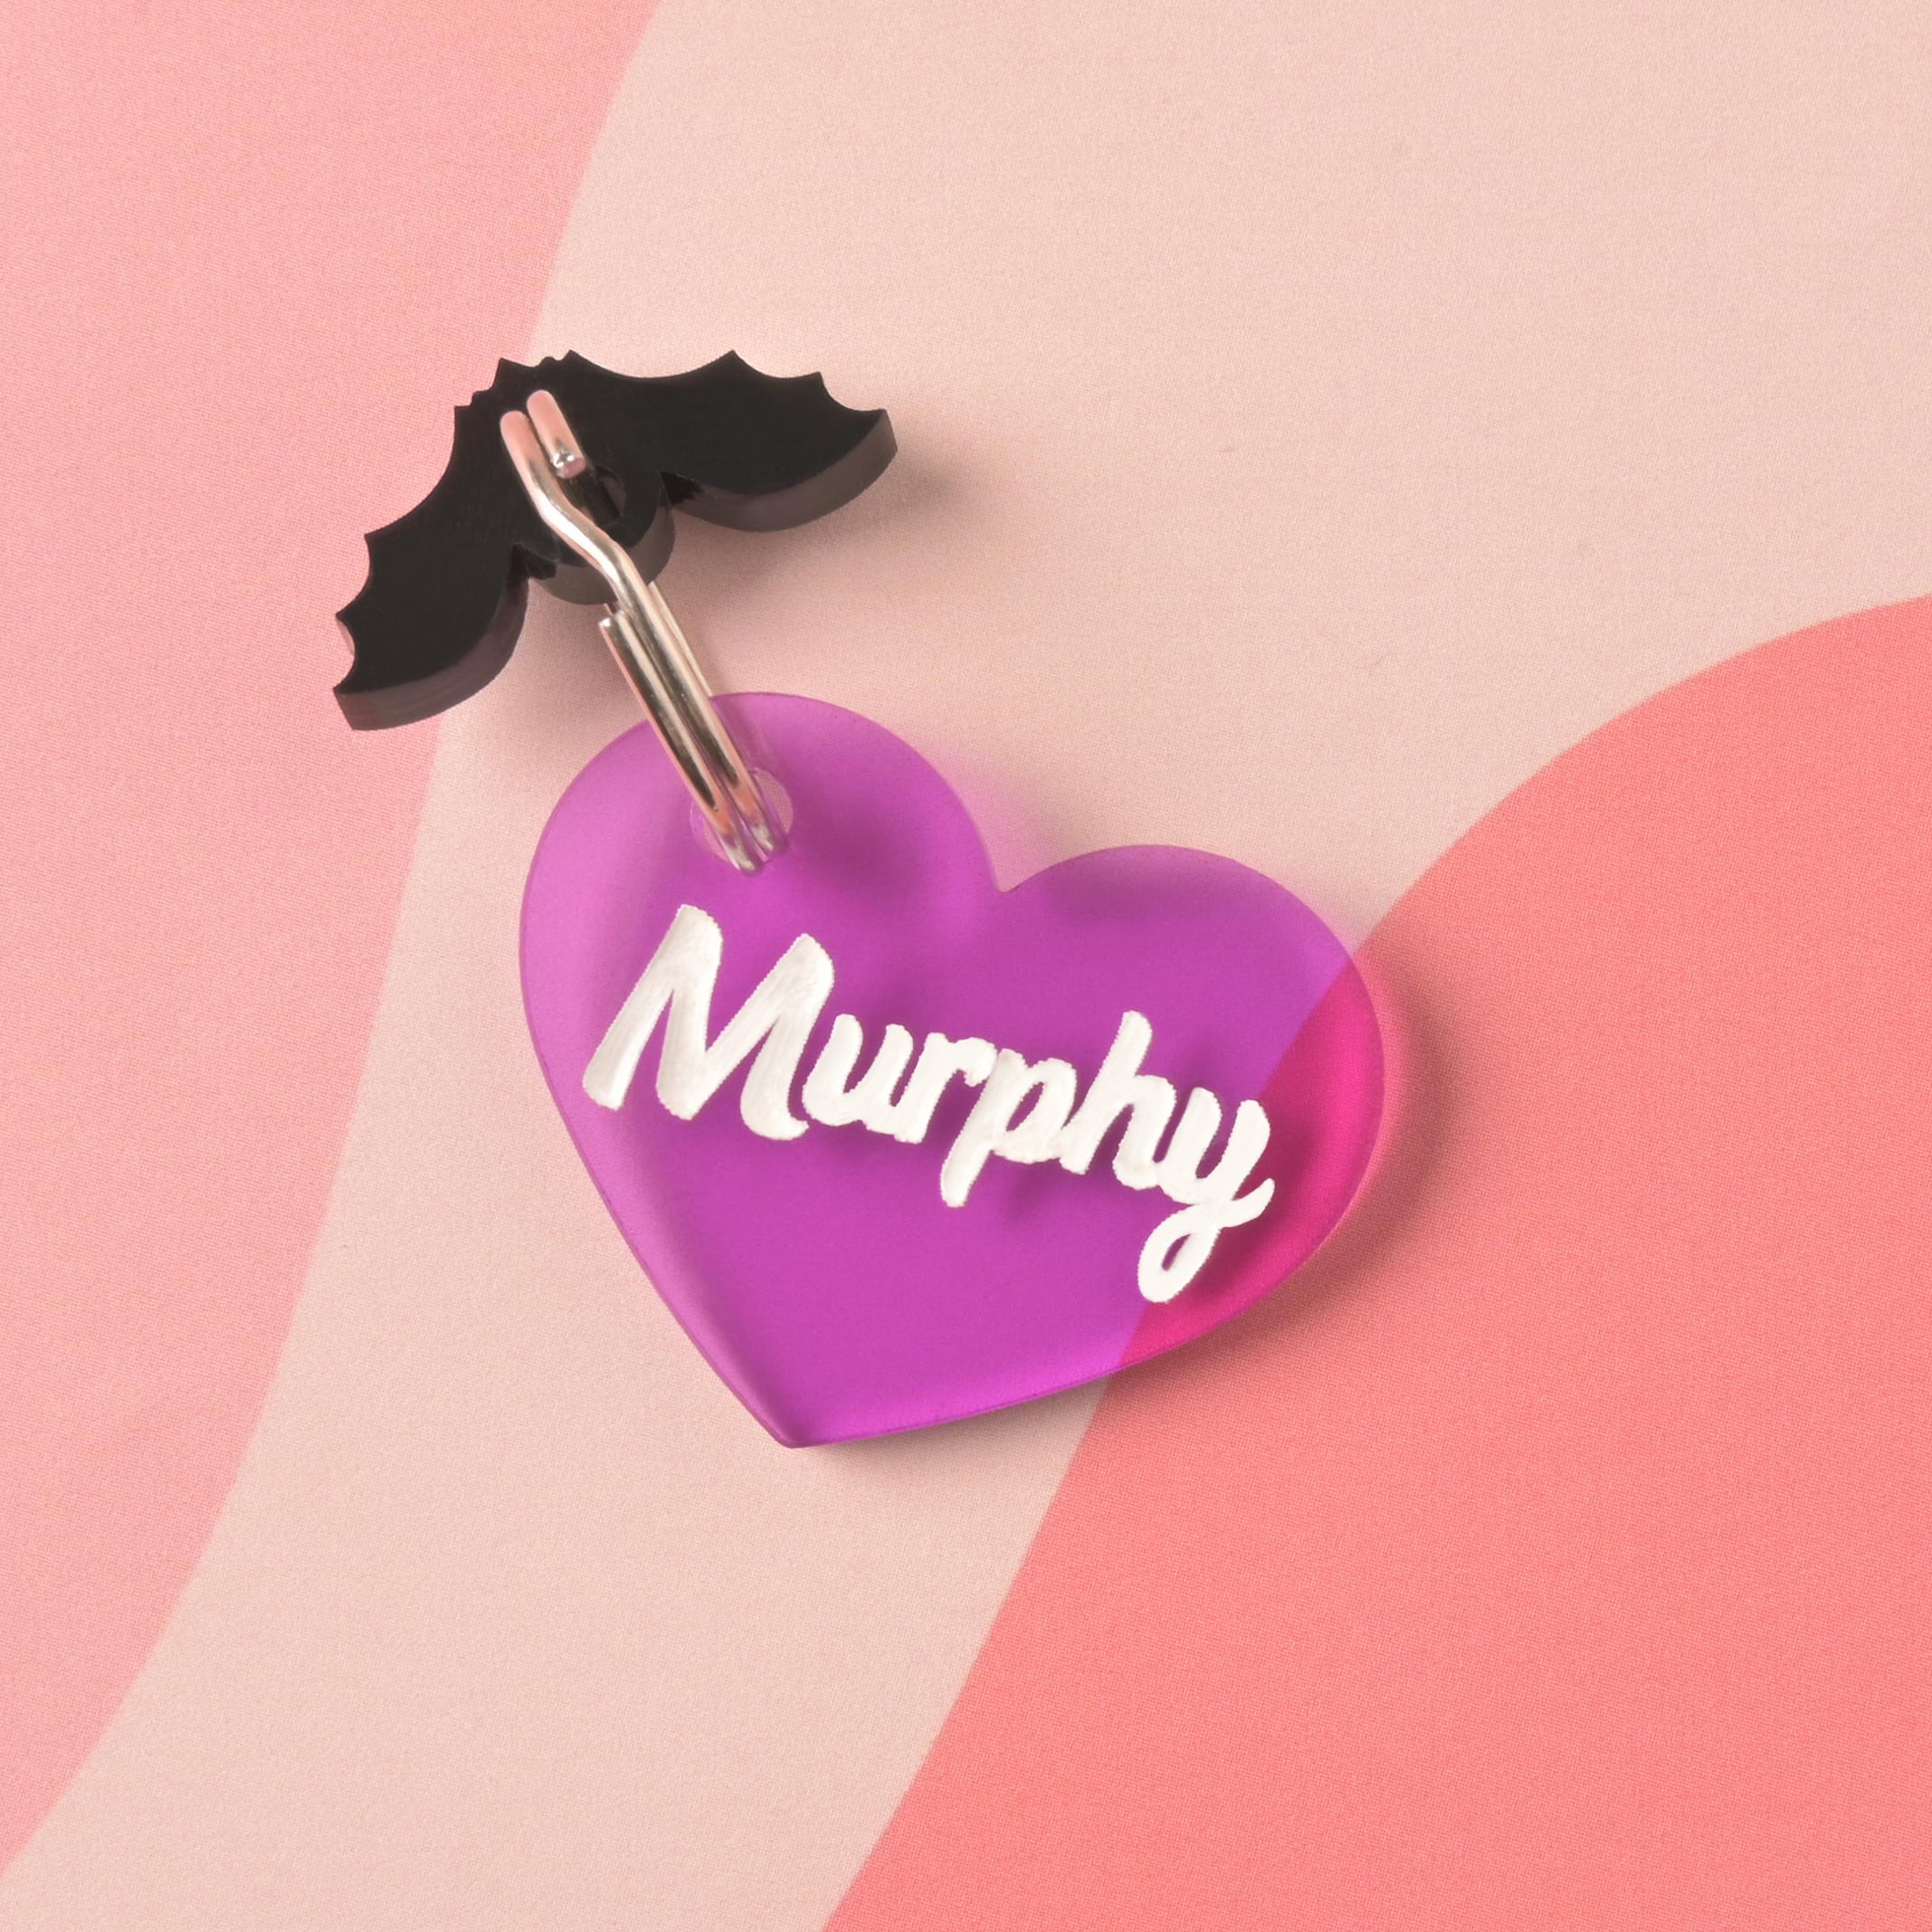 Lucy Heart Personalized Pet Tag